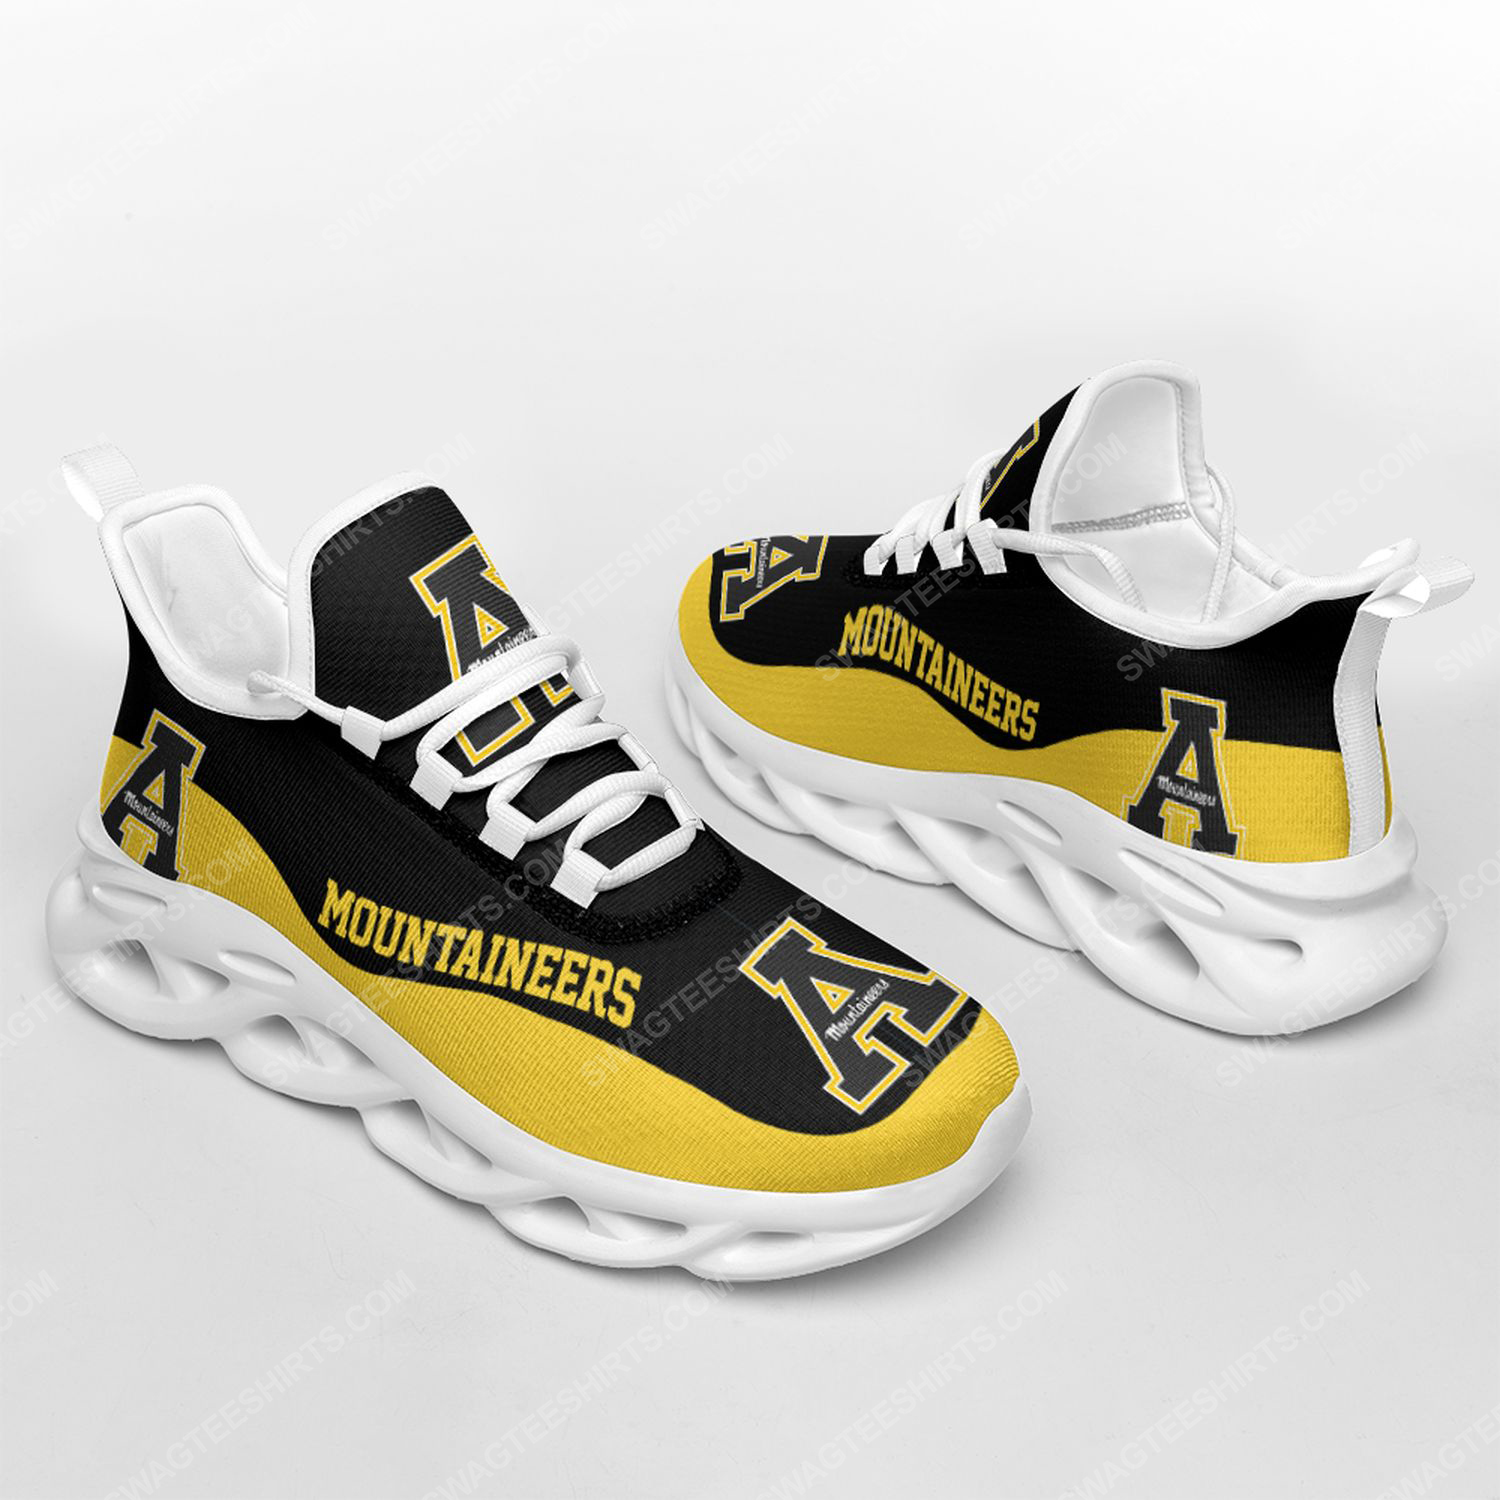 [special edition] The appalachian state mountaineers football team max soul shoes – Maria